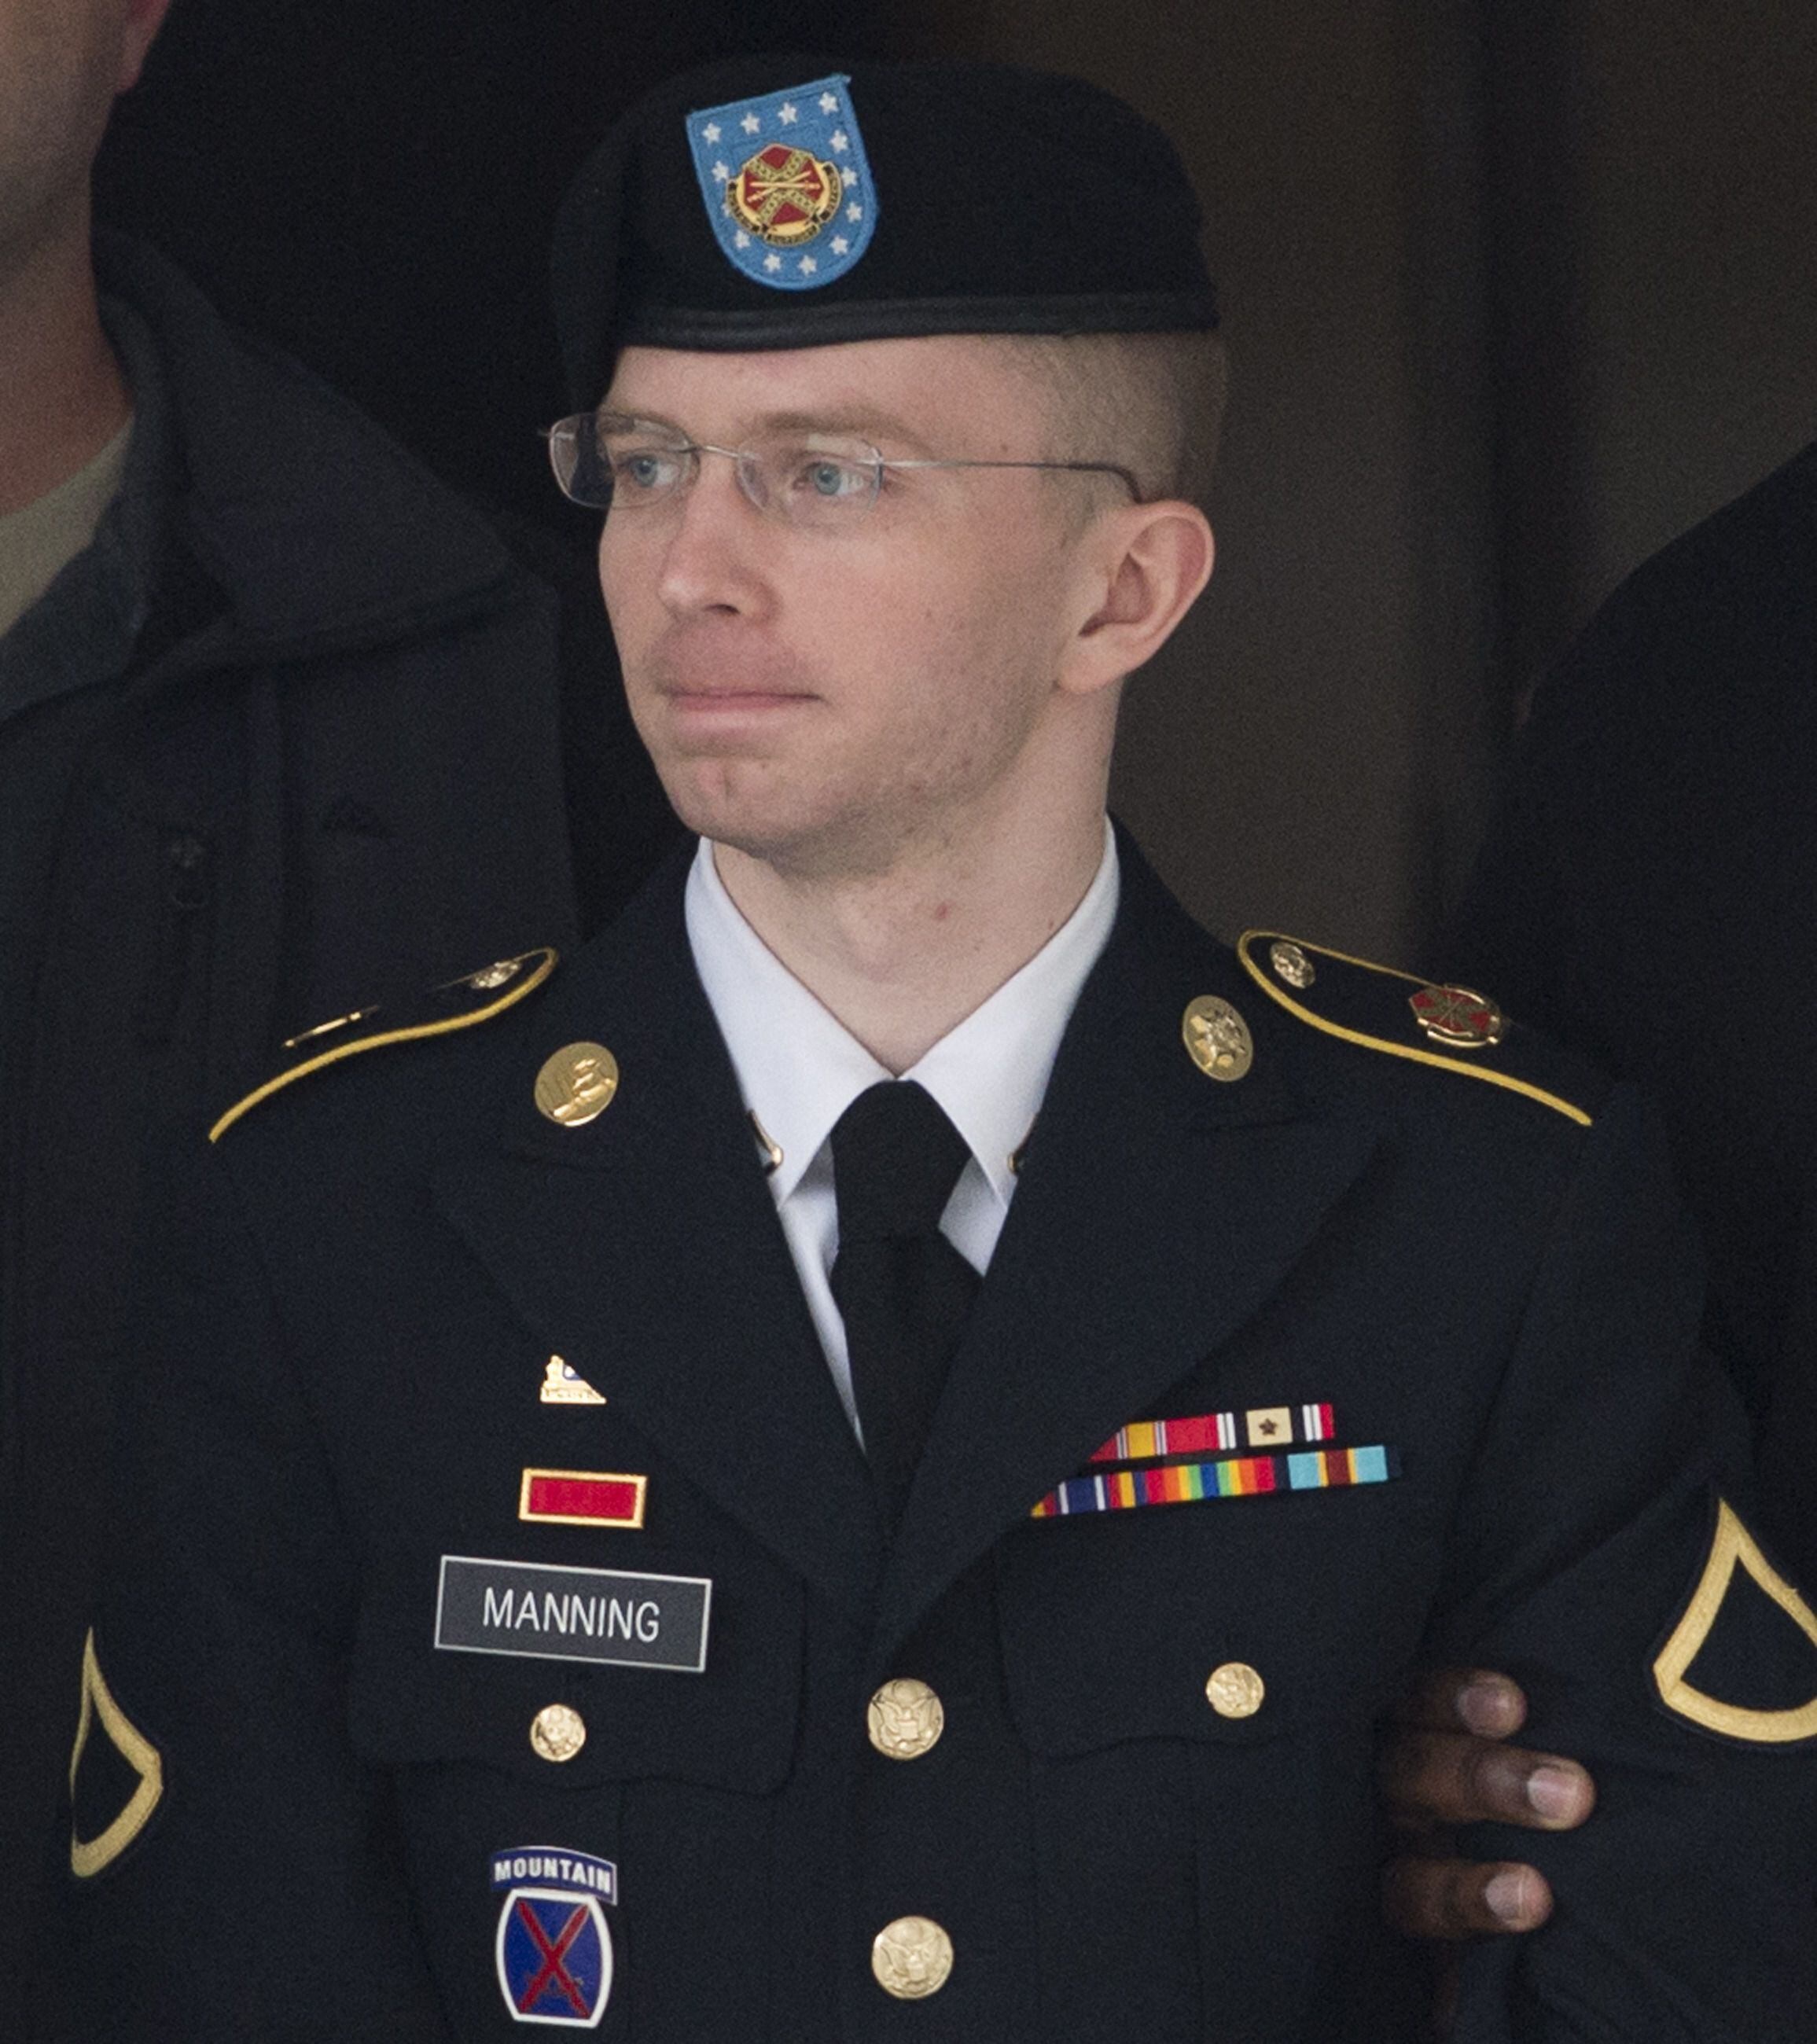 US Army Private First Class Bradley Manning leaves a US military tribunal at Fort Meade, Maryland, on August 20, 2013. Years later, she changed her name to Chelsea Manning.  (Photo by SAÚL LOEB/AFP).